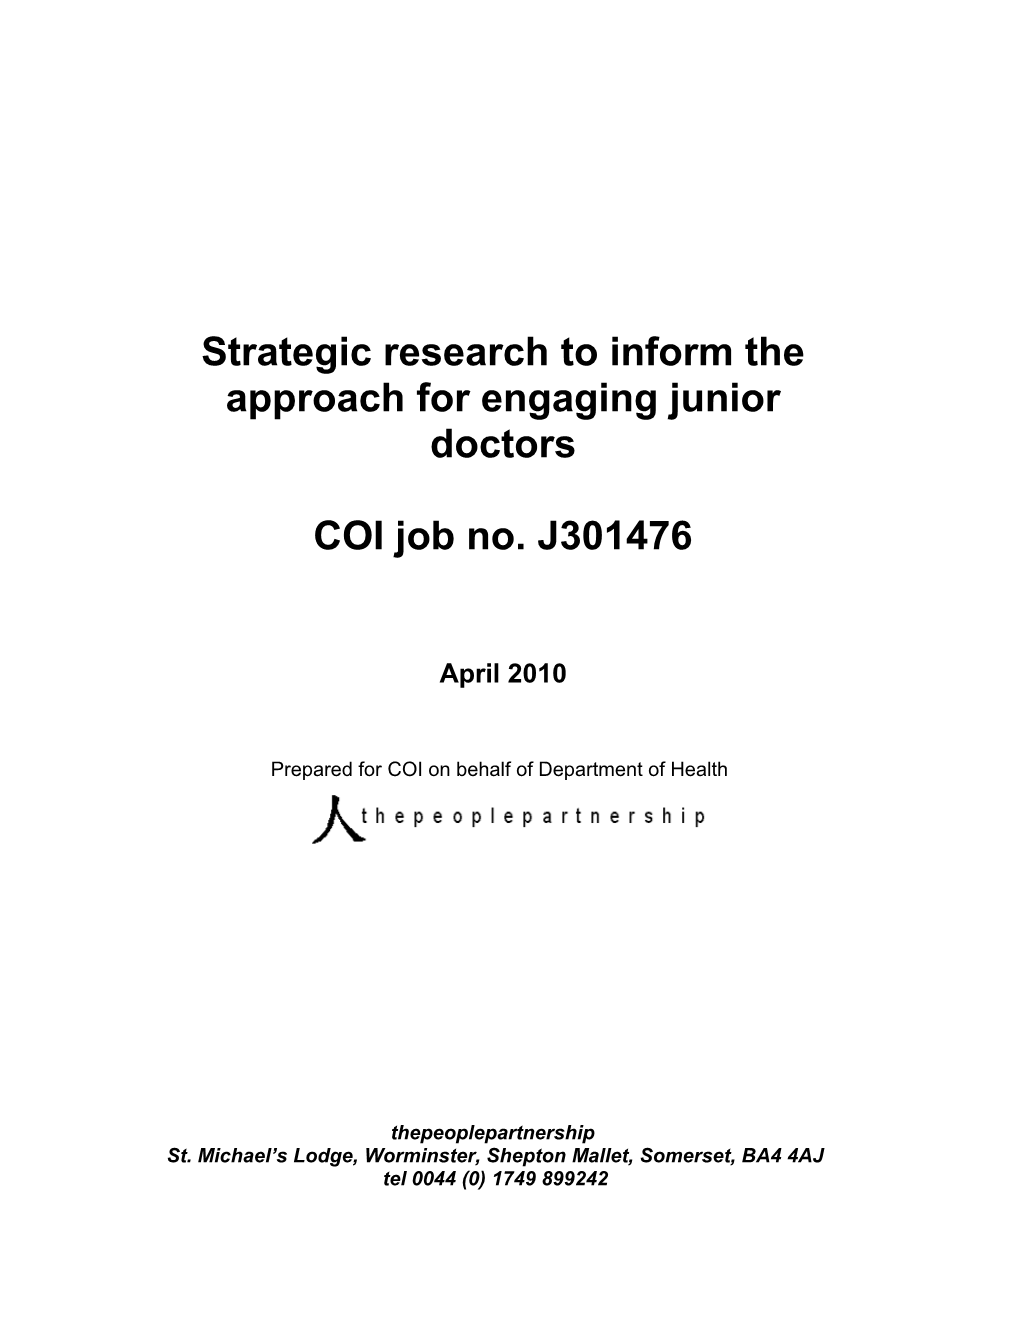 Strategic Research to Inform the Approach for Engaging Junior Doctors